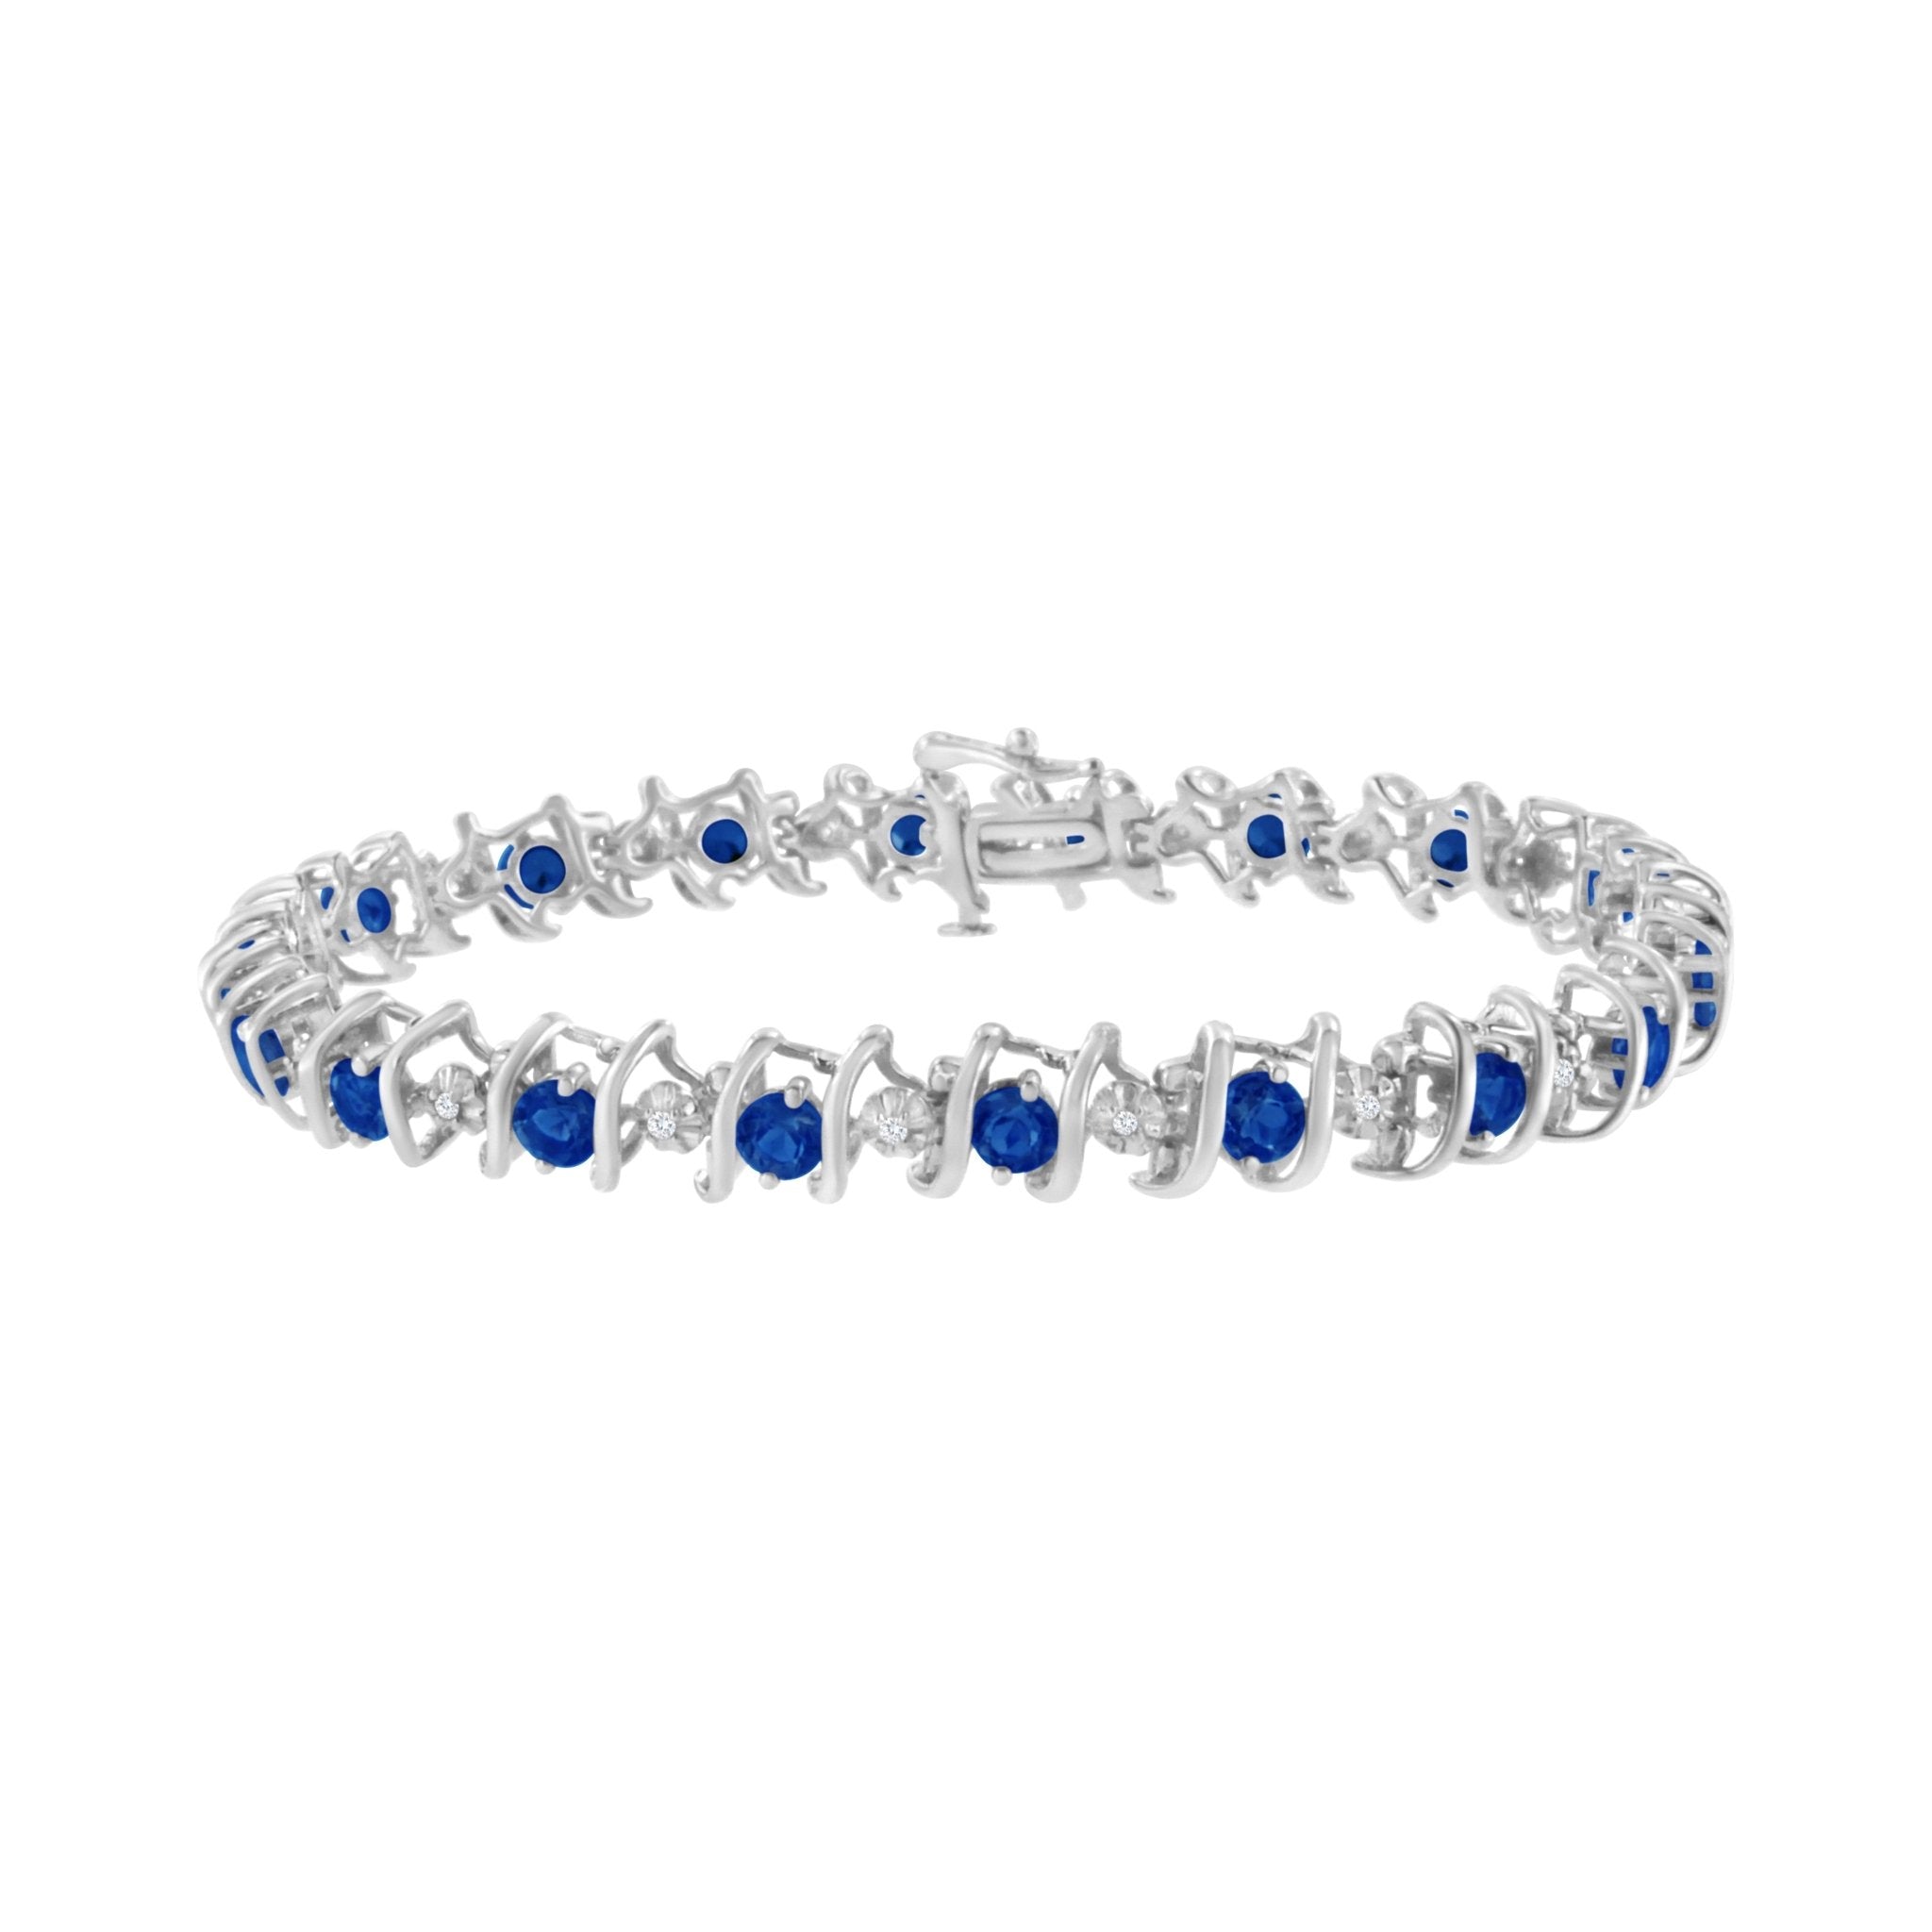 .925-Sterling-Silver,-Lab-Grown-Gemstone-And-4-Cttw-Round-Diamond-Tennis-Bracelet-(H-I-Color,-I1-I2-Clarity)-Created-Blue-Sapphire,-September-Birthstone-Bracelets